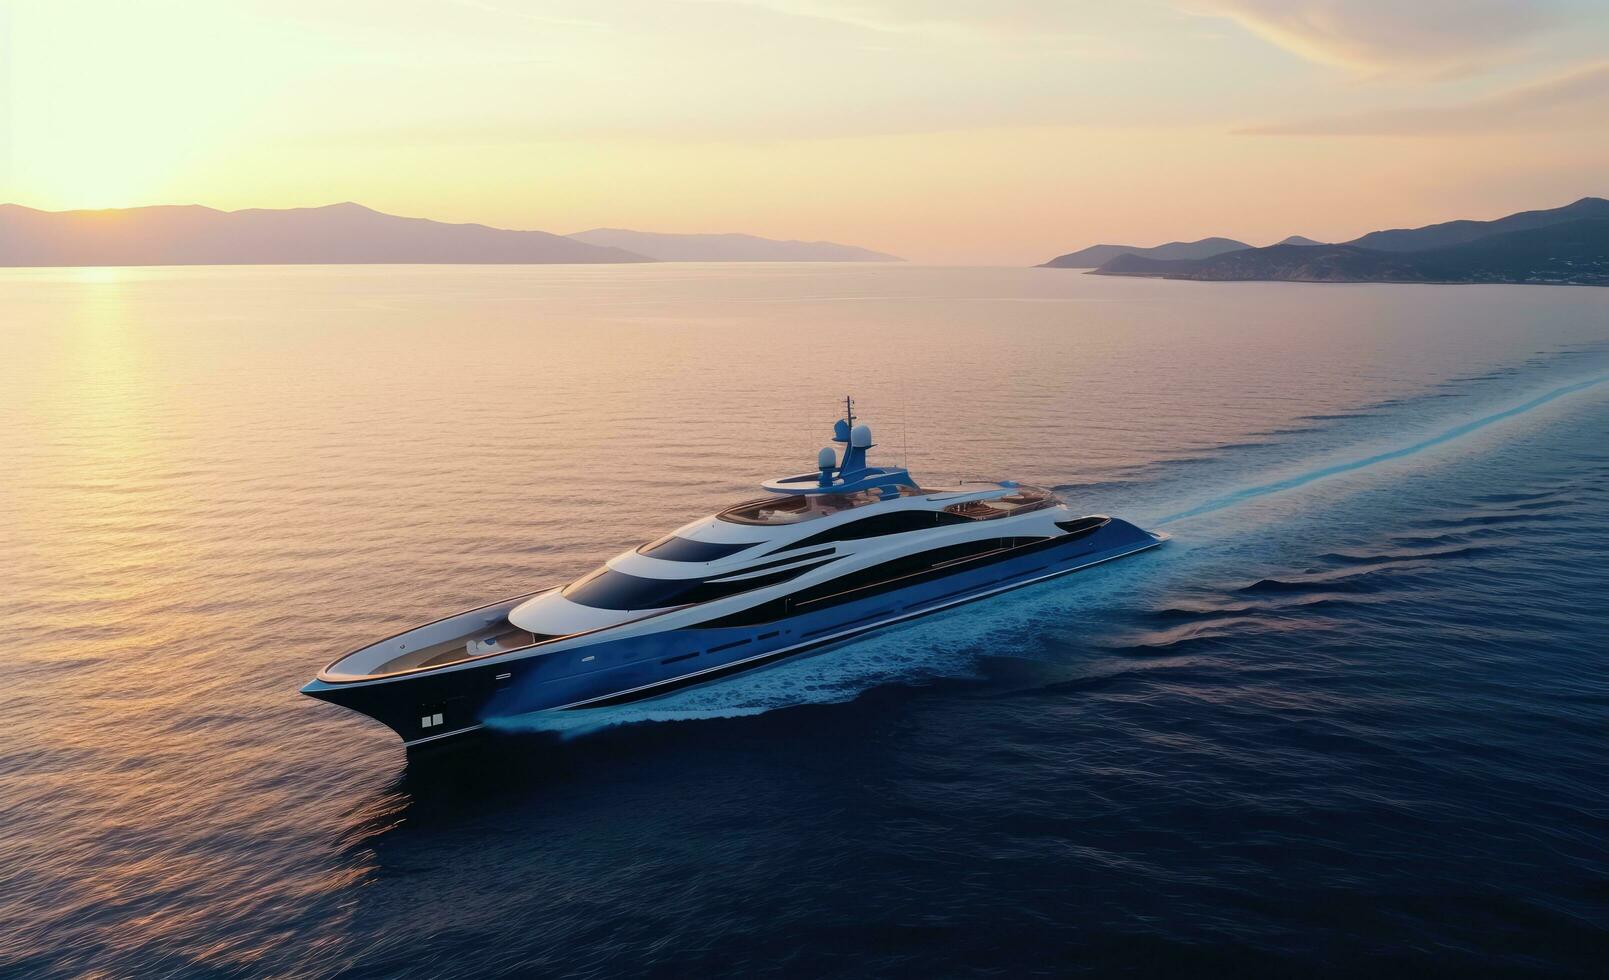 AI generated a large motor yacht at sunset photo